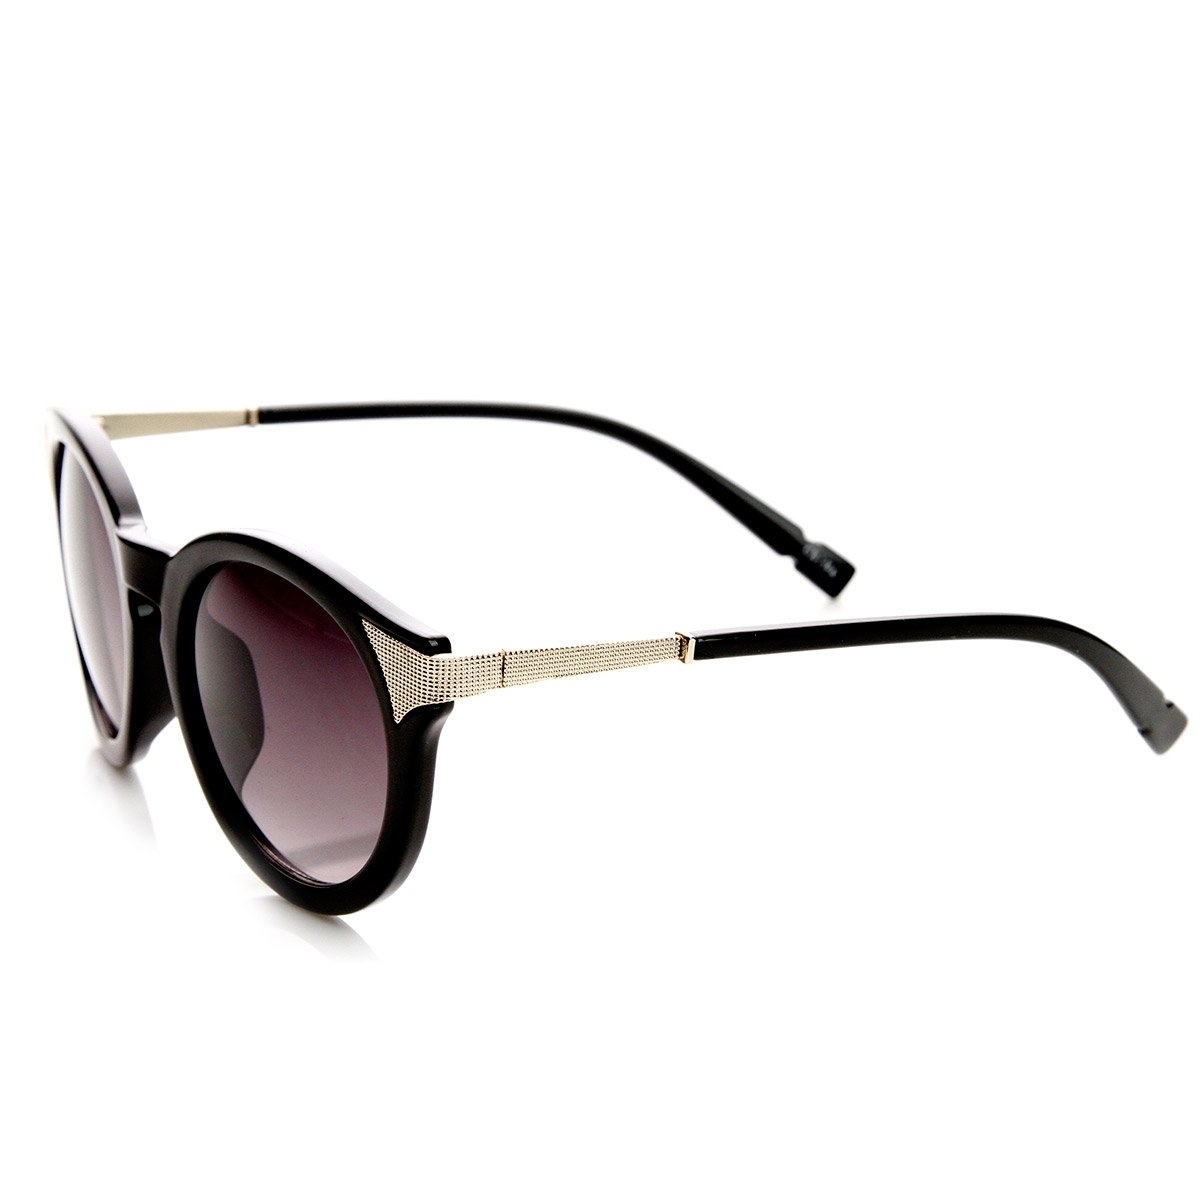 Mod Fashion Metal Temple Keyhole Round Horn Rimmed Sunglasses - Brown-Tortoise